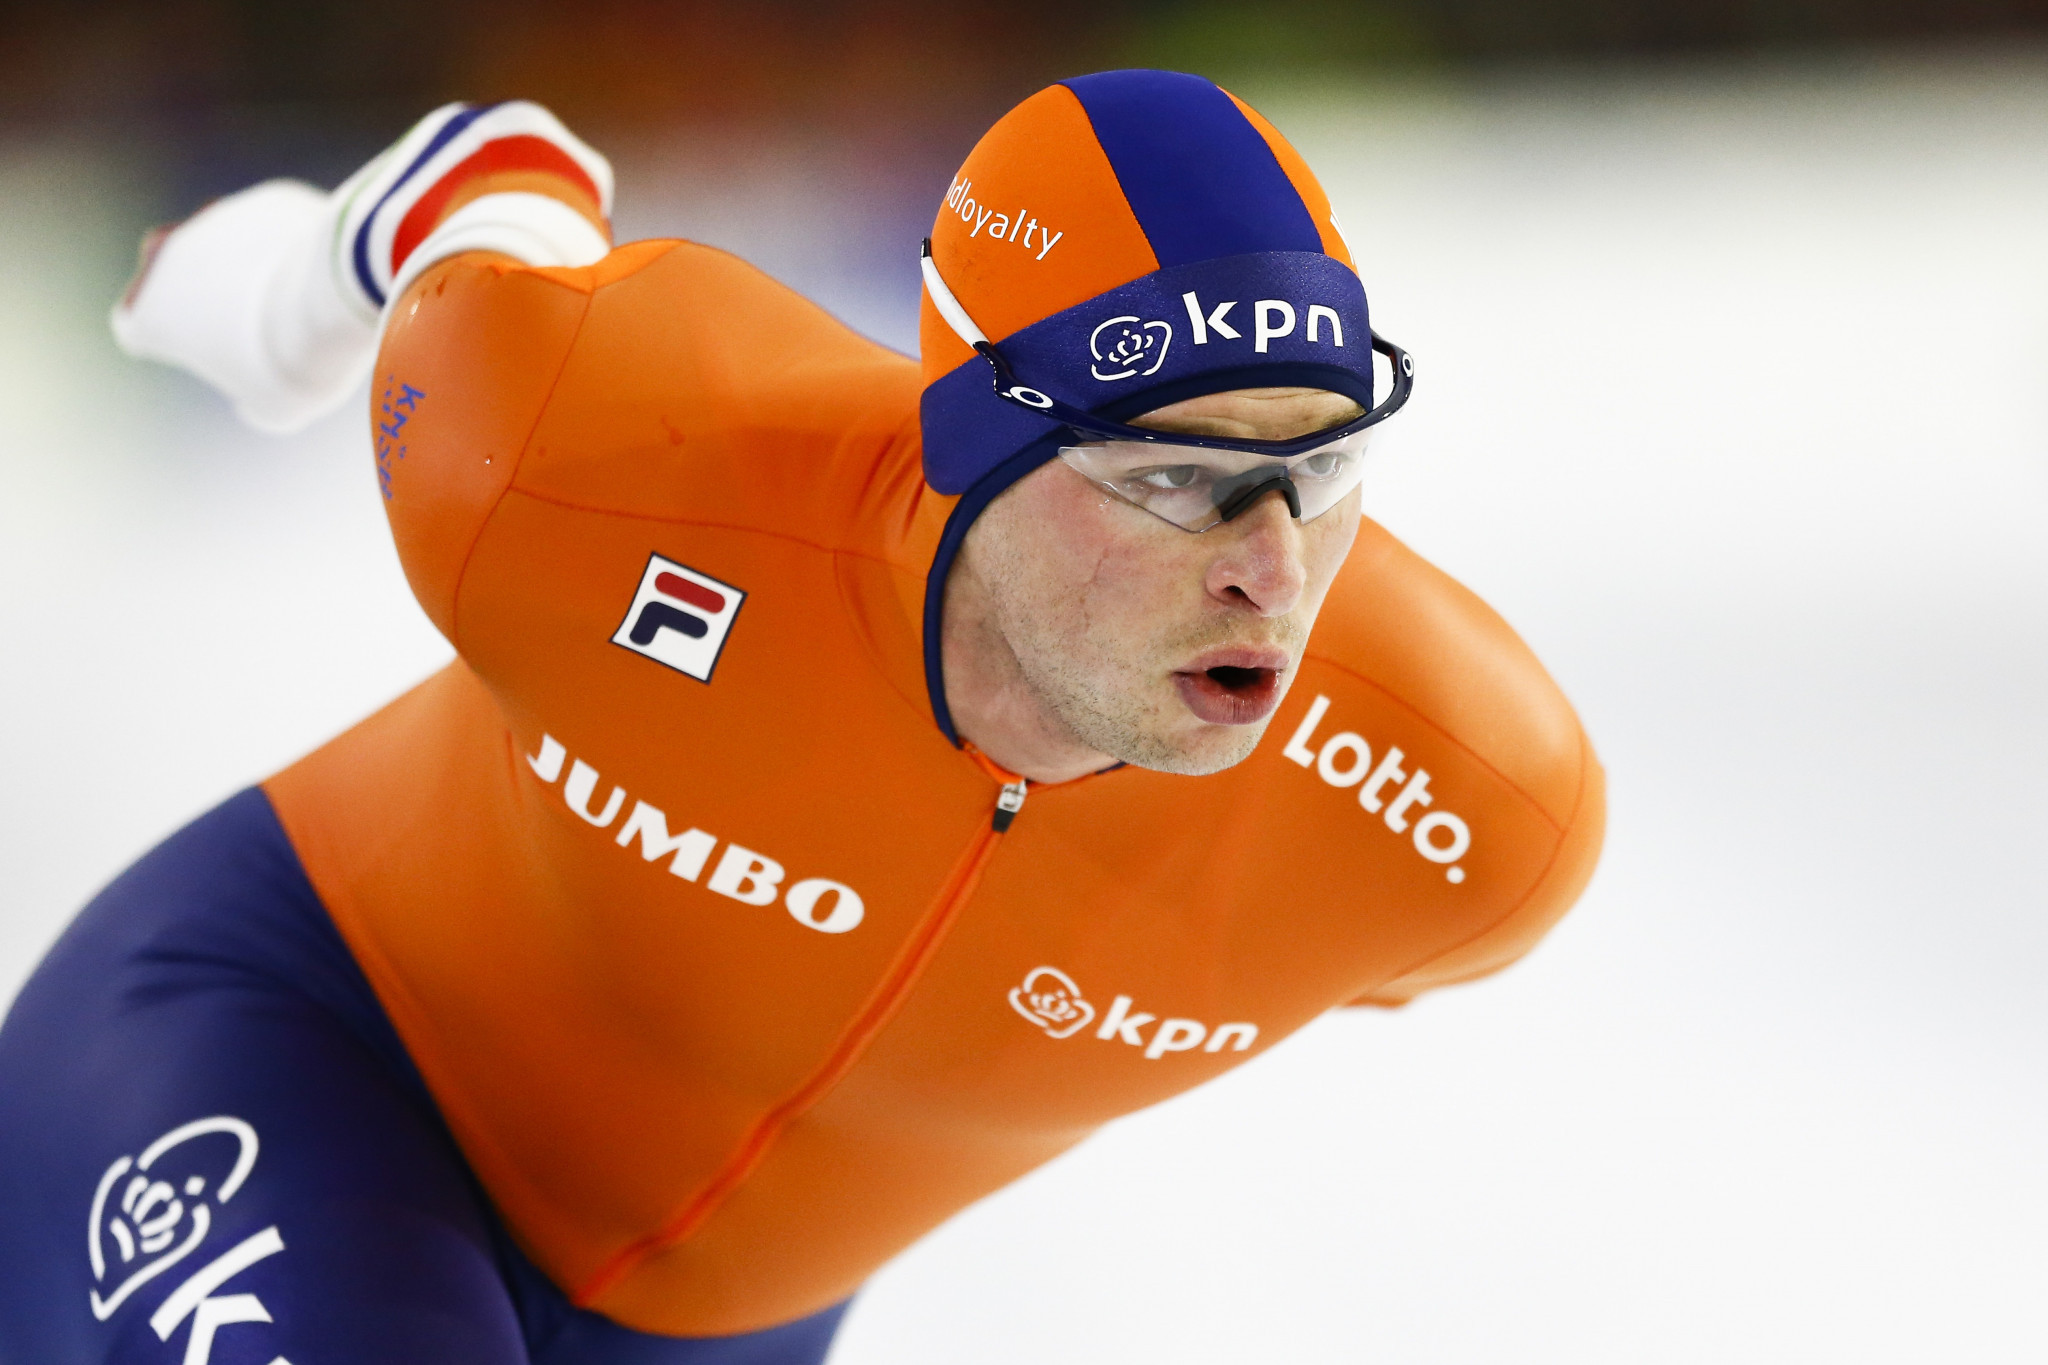 Sven Kramer was among other winners on the first day of competition ©Getty Images